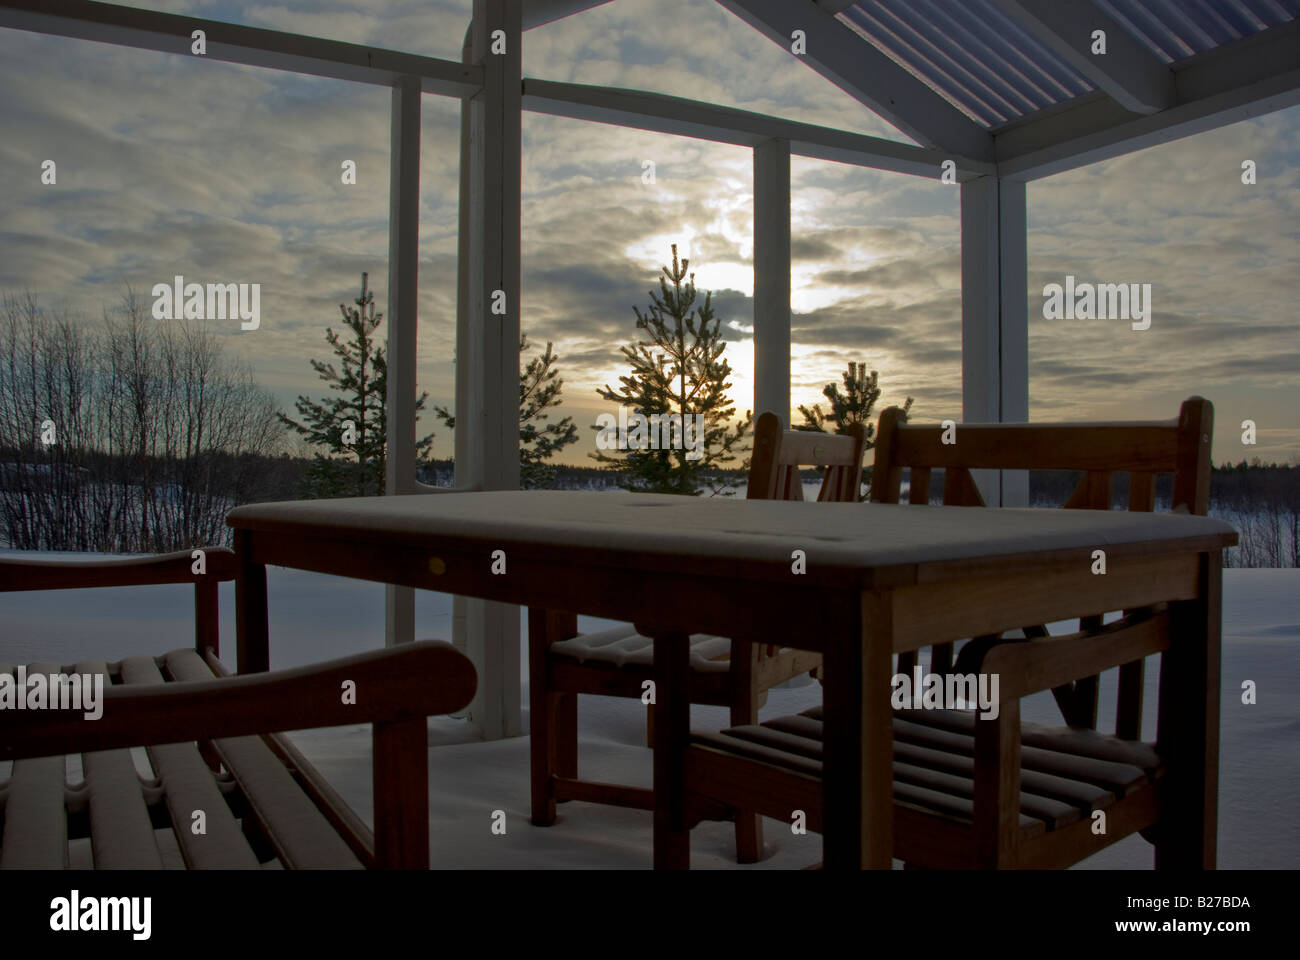 A verandah in Lapland in winter with the furniture covered in snow Stock Photo